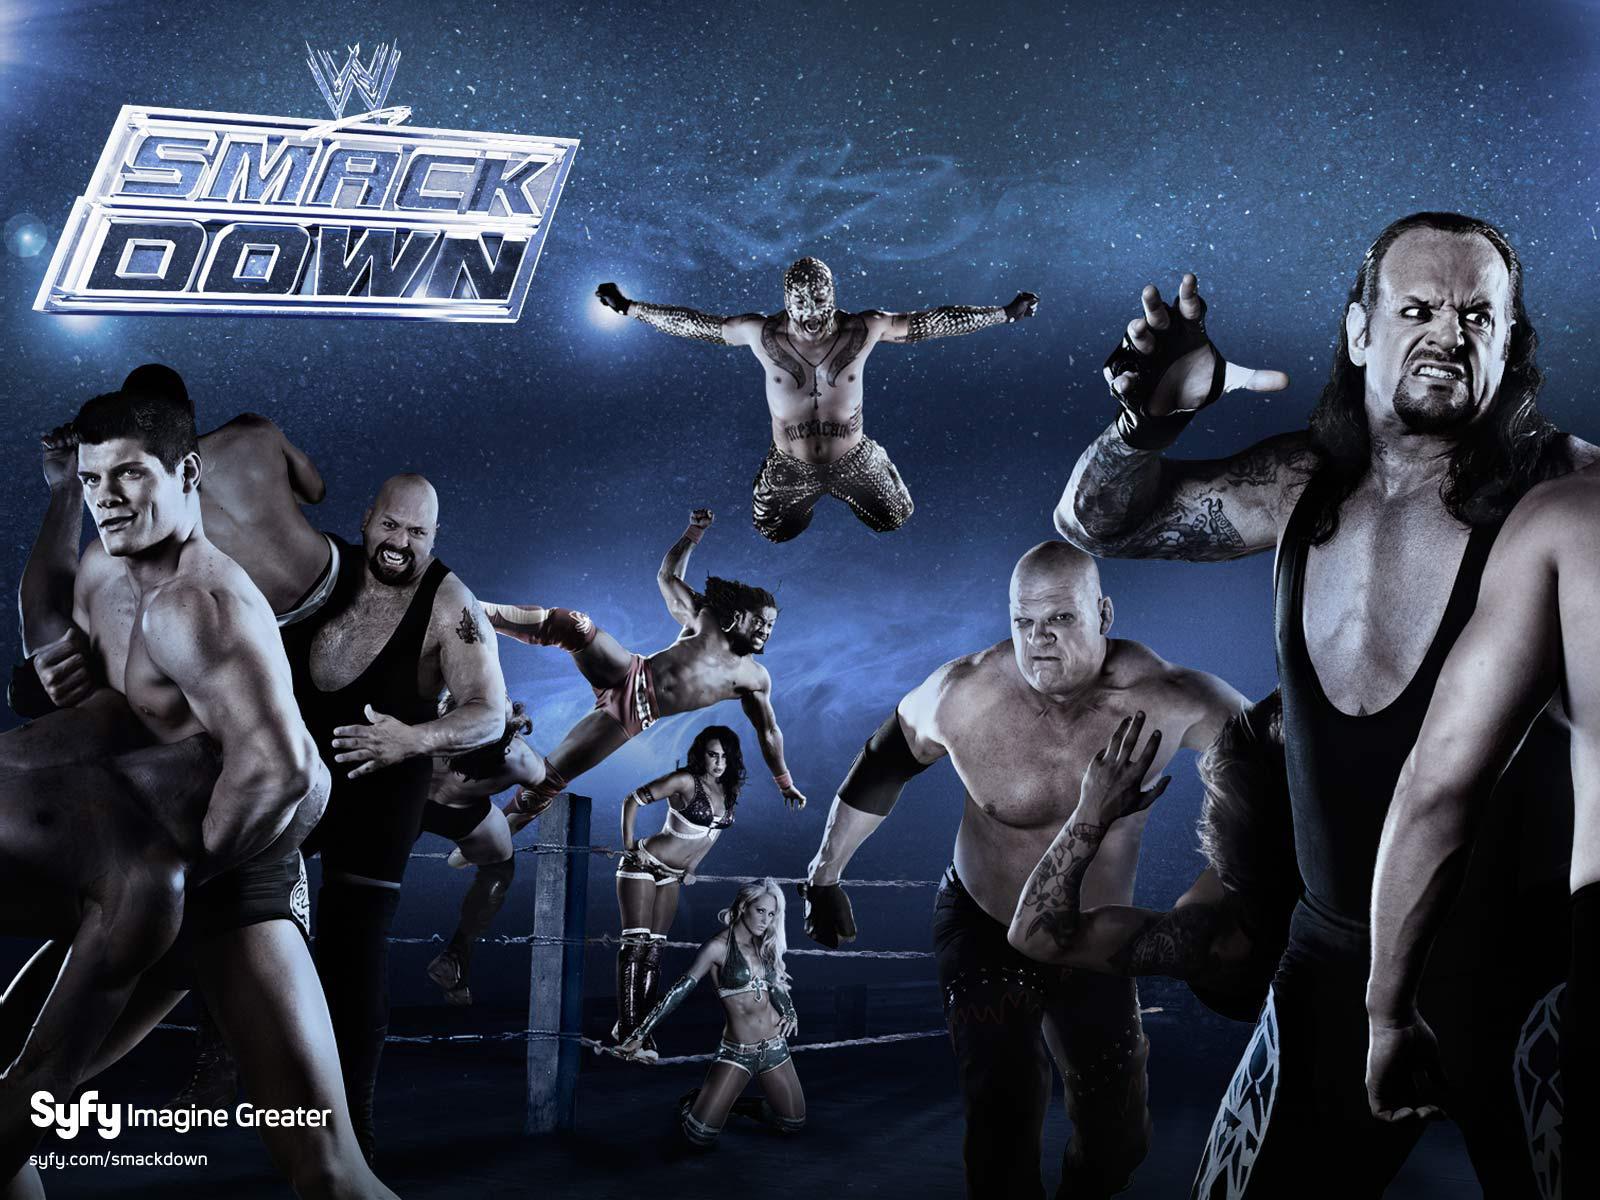 wwe smackdown! image WWE SmackDown HD wallpaper and background